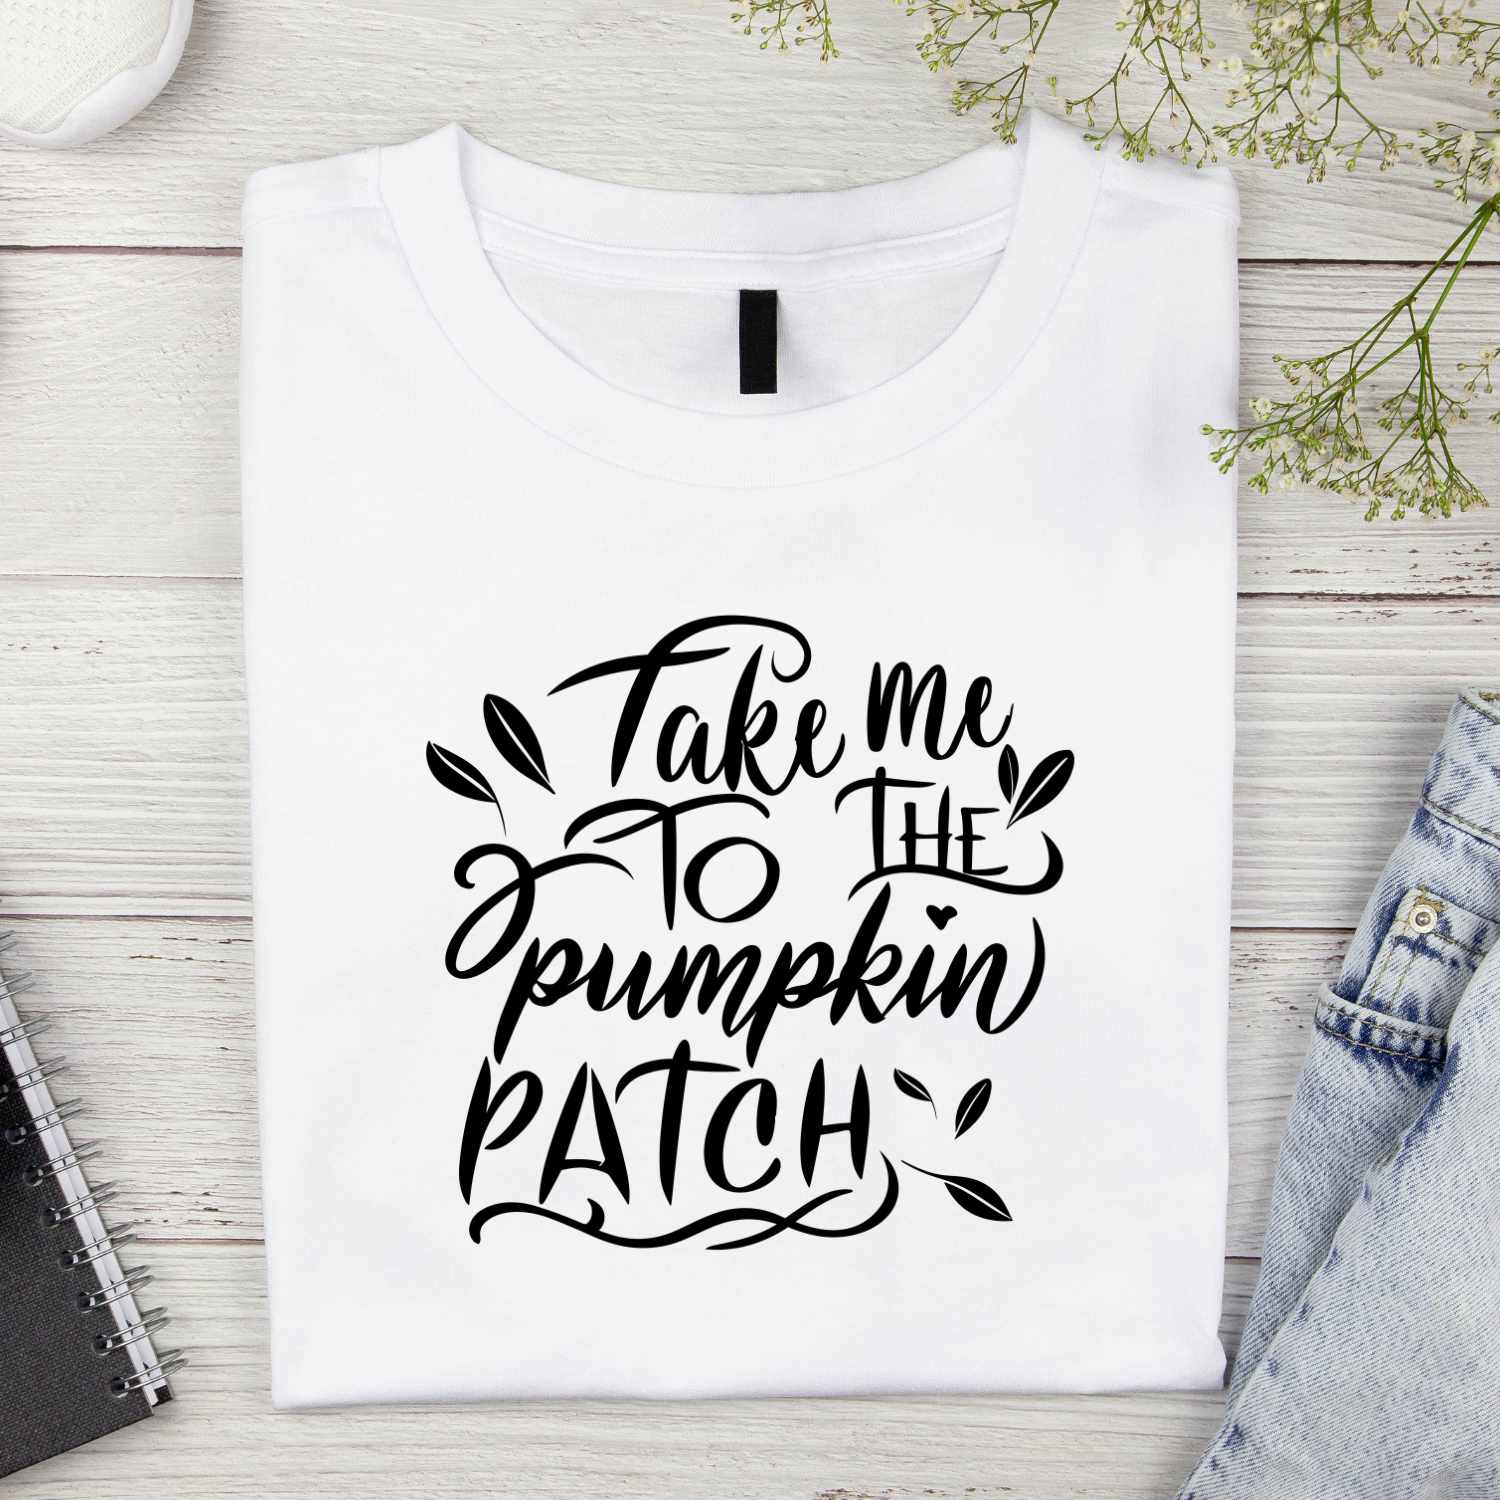 Take Me To The Pumpkin Patch Typography T-Shirt Design